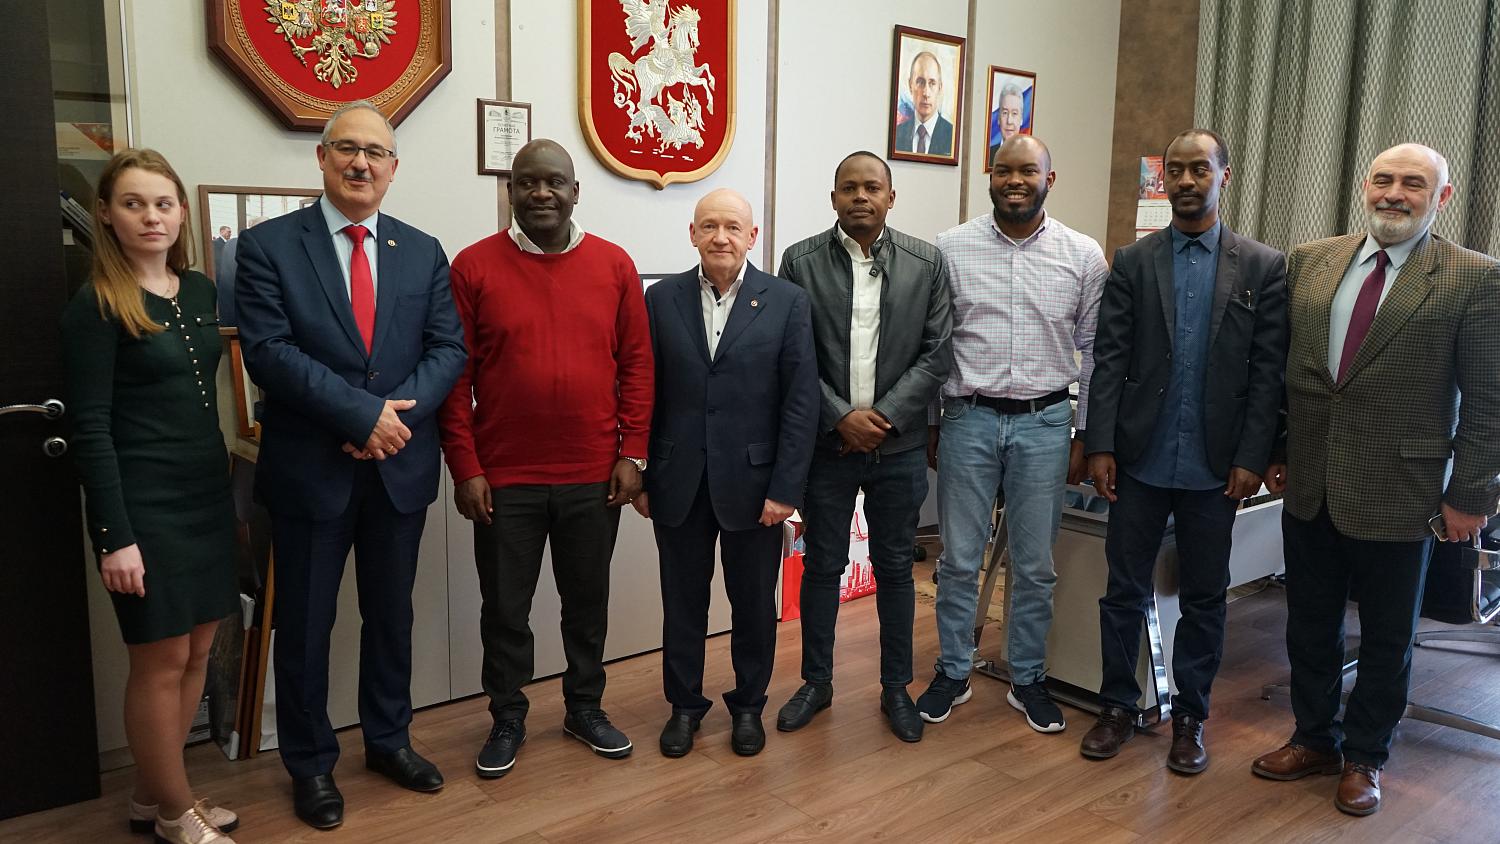 The MCCI was visited by distinguished guests from Kenya